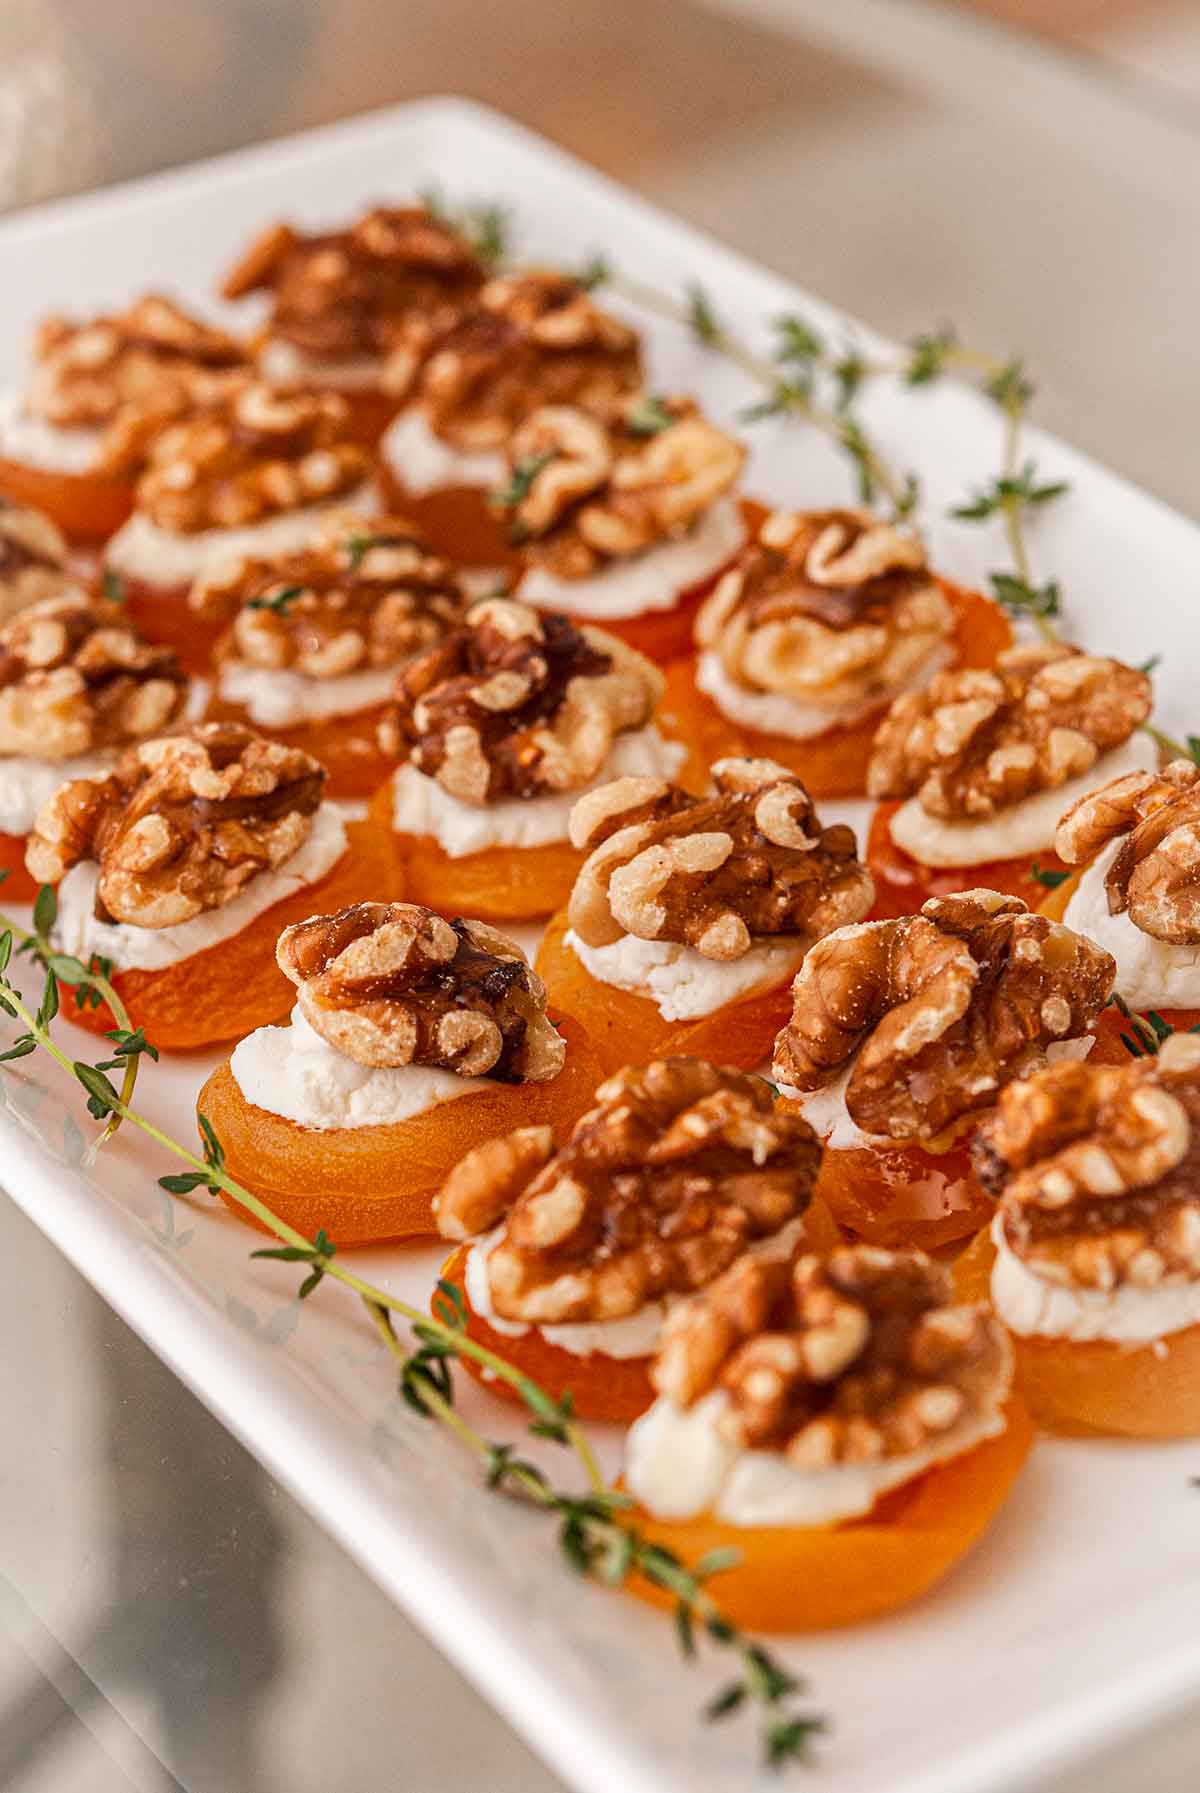 About 20 apricot appetizers on a plate, garnished with thyme.